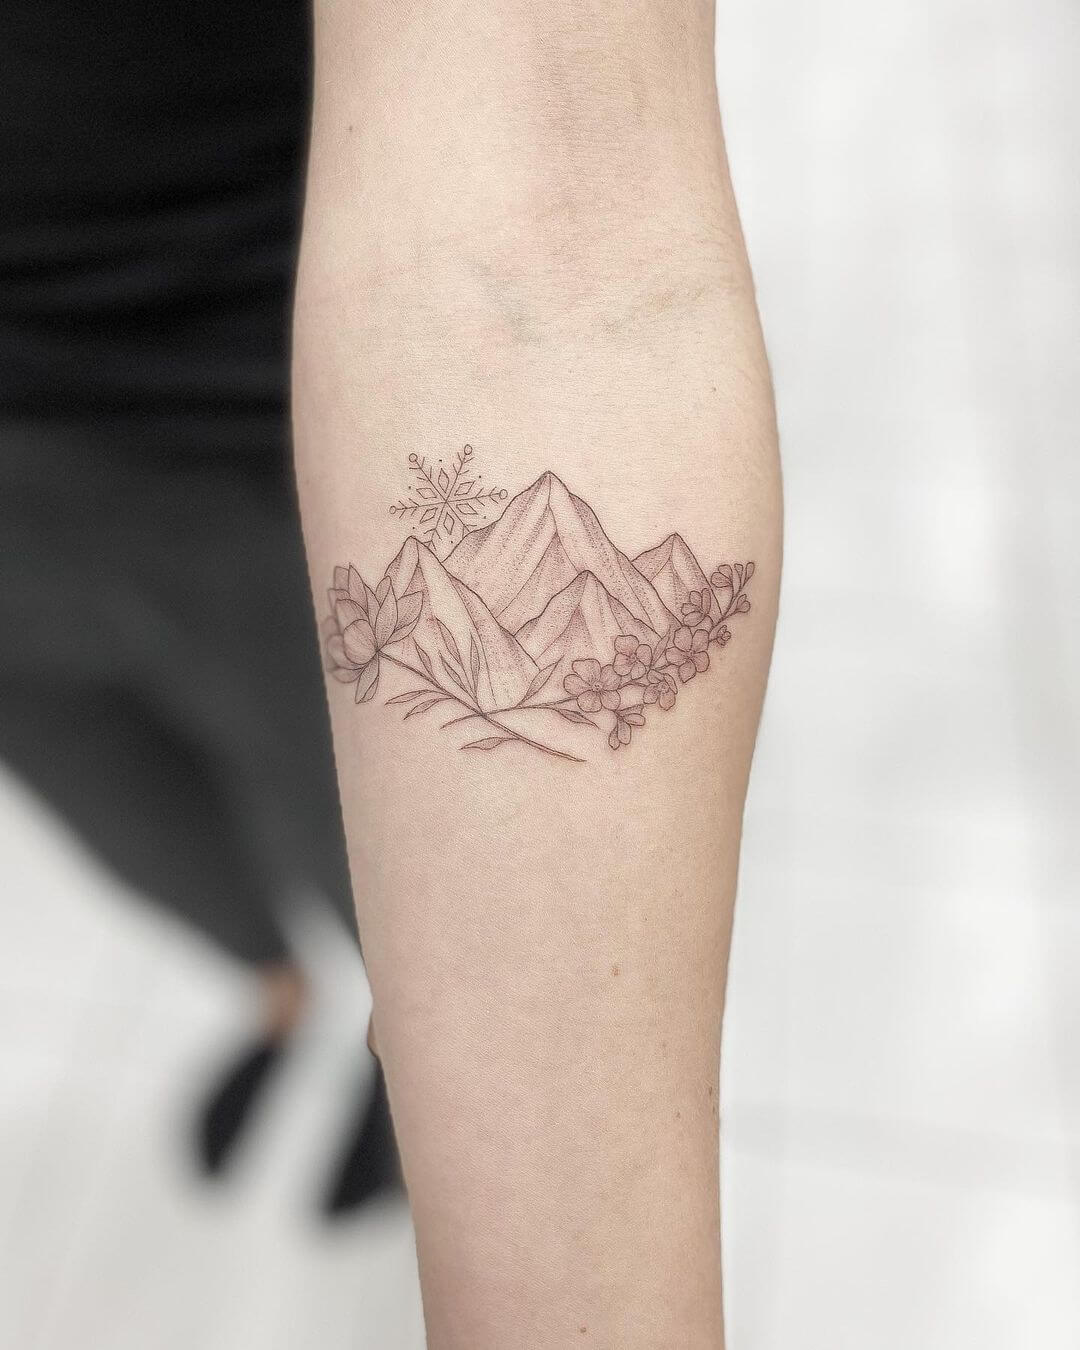 All About Fine Line Tattoos: Artists, Features, Design Ideas